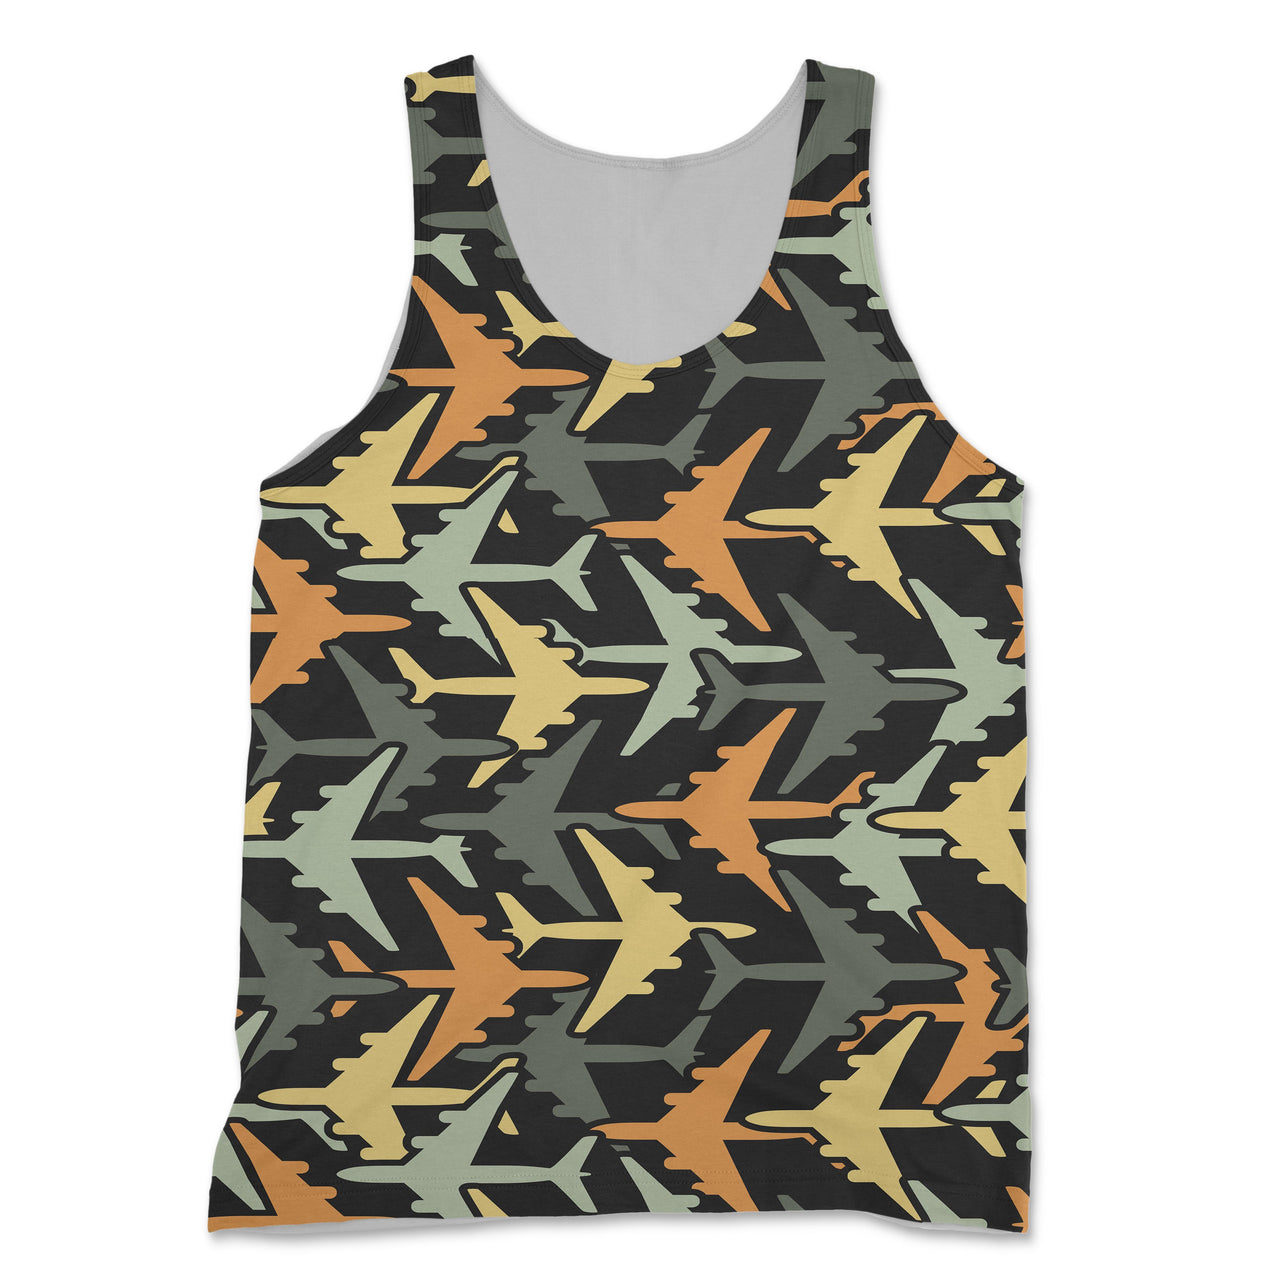 Volume 2 Super Colourful Airplanes Designed 3D Tank Tops